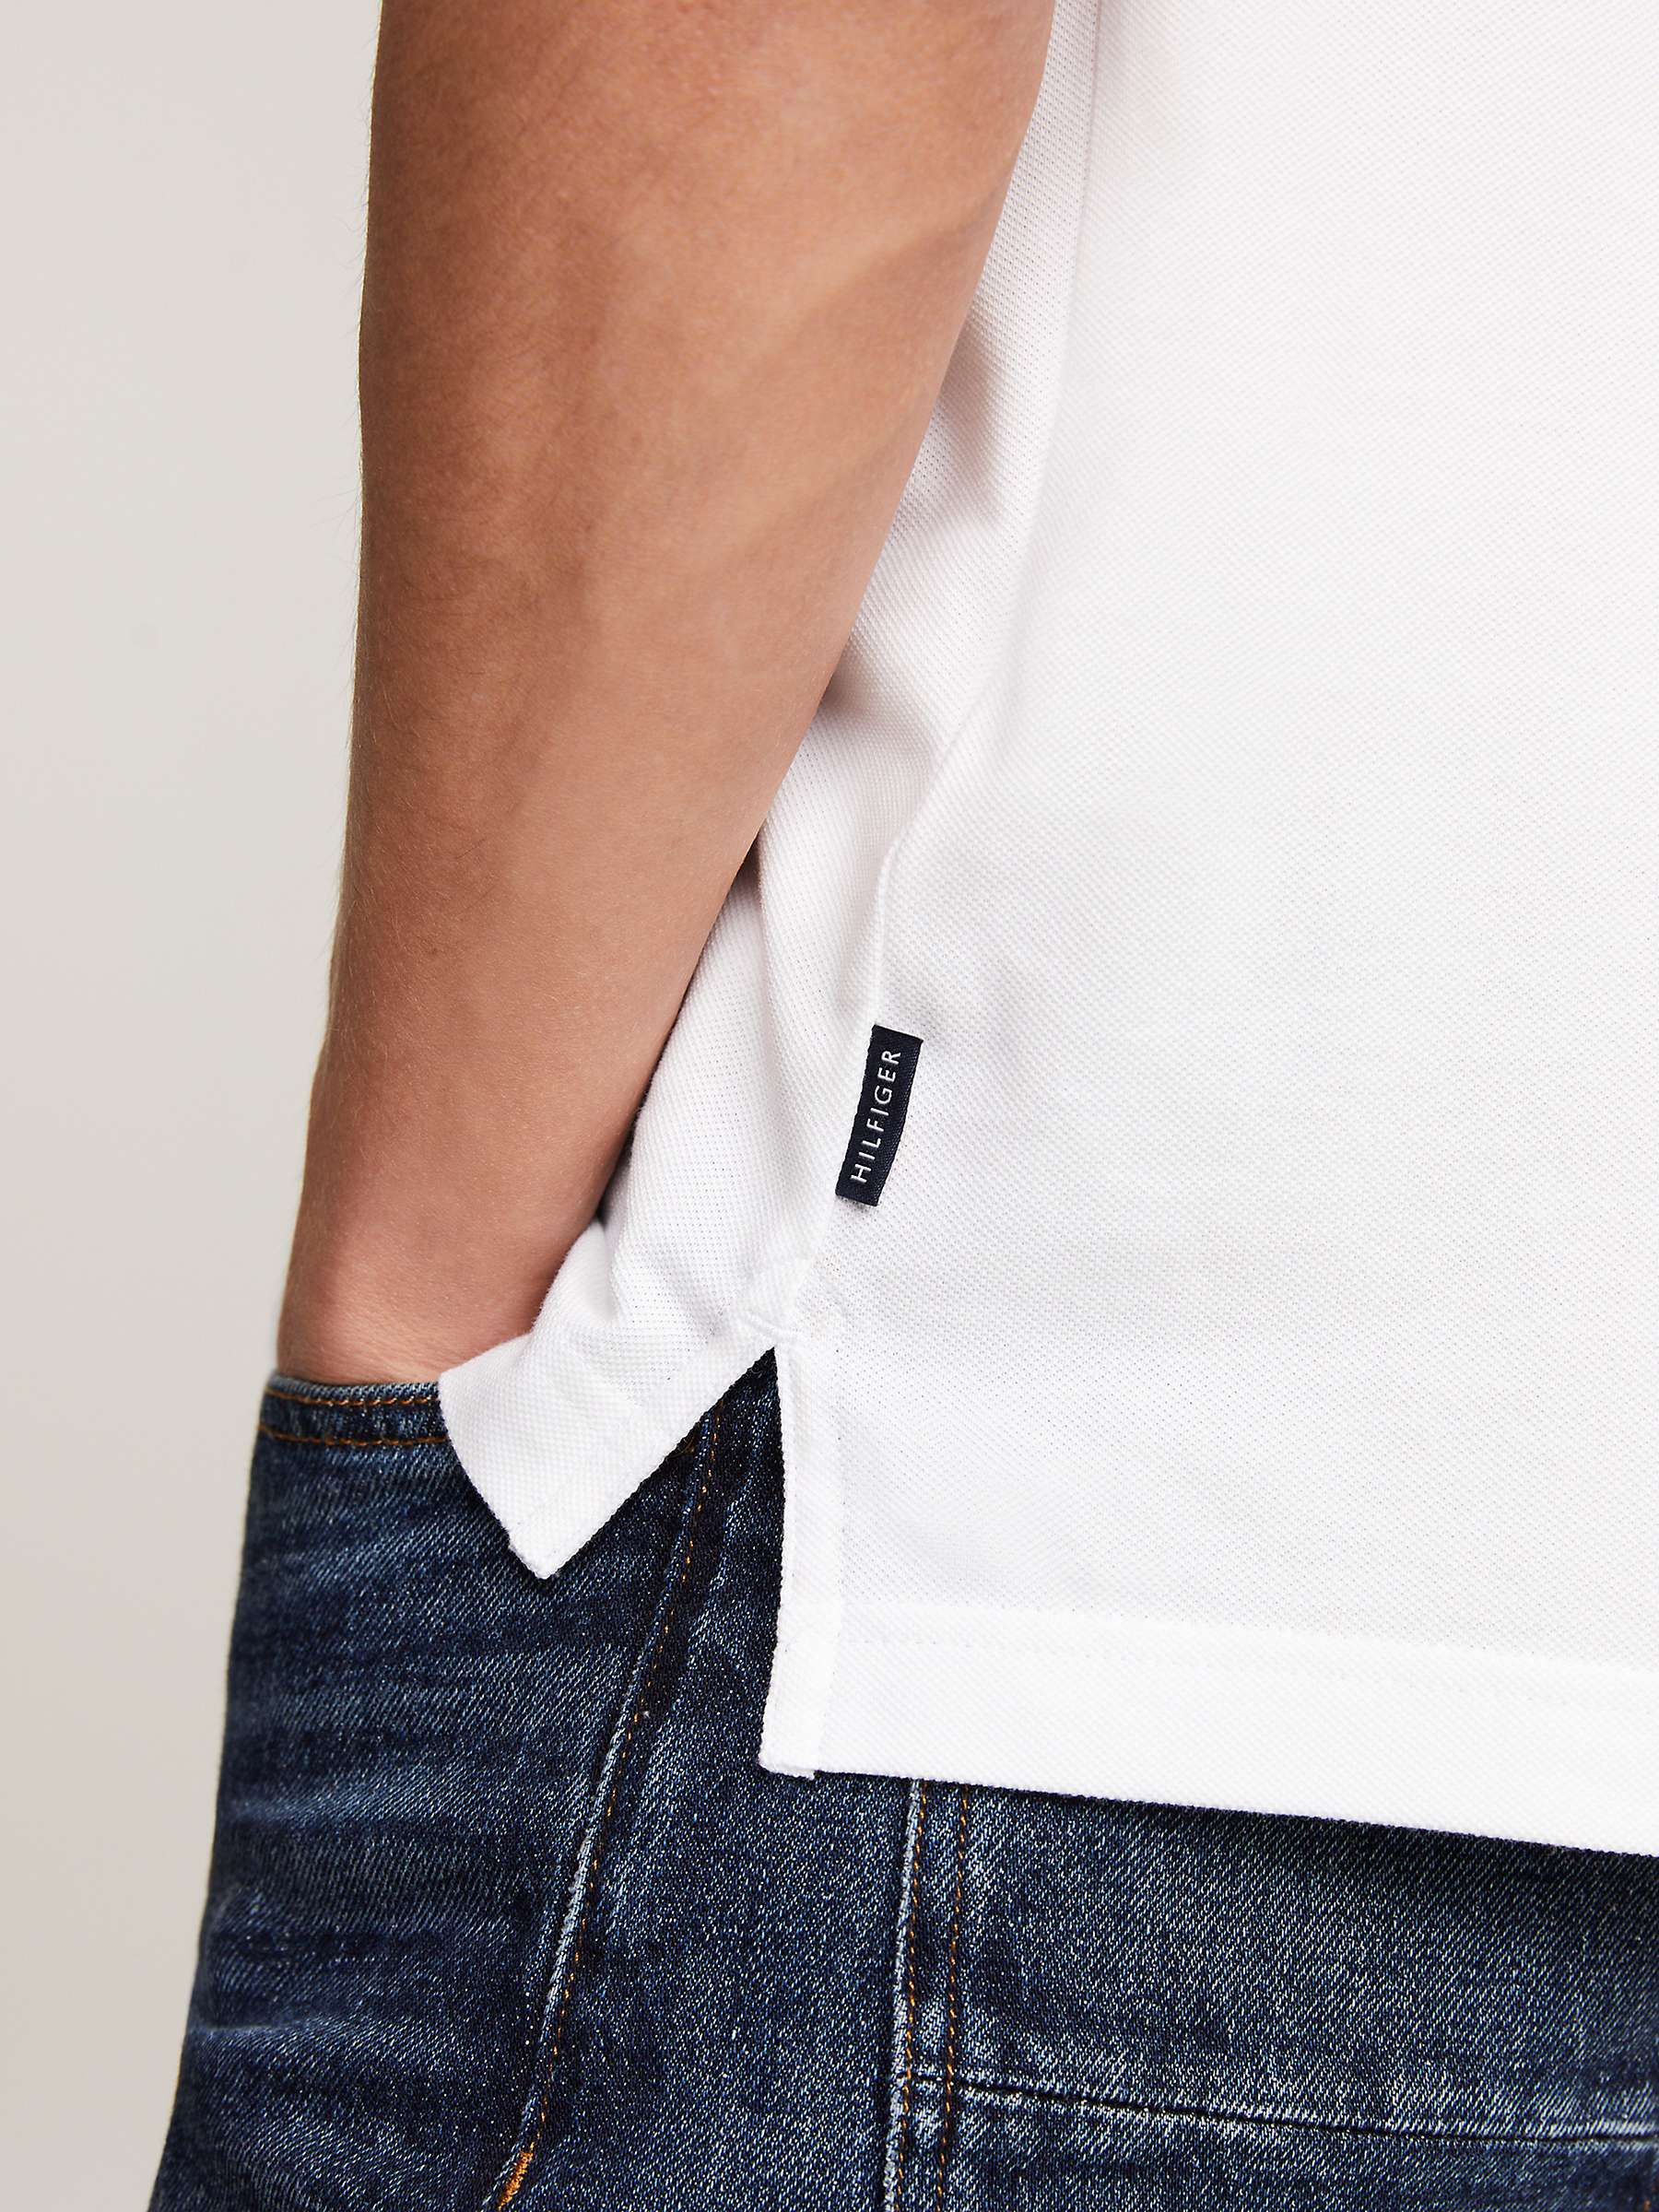 Tommy Hilfiger Regular Fit Polo Shirt, White at John Lewis & Partners